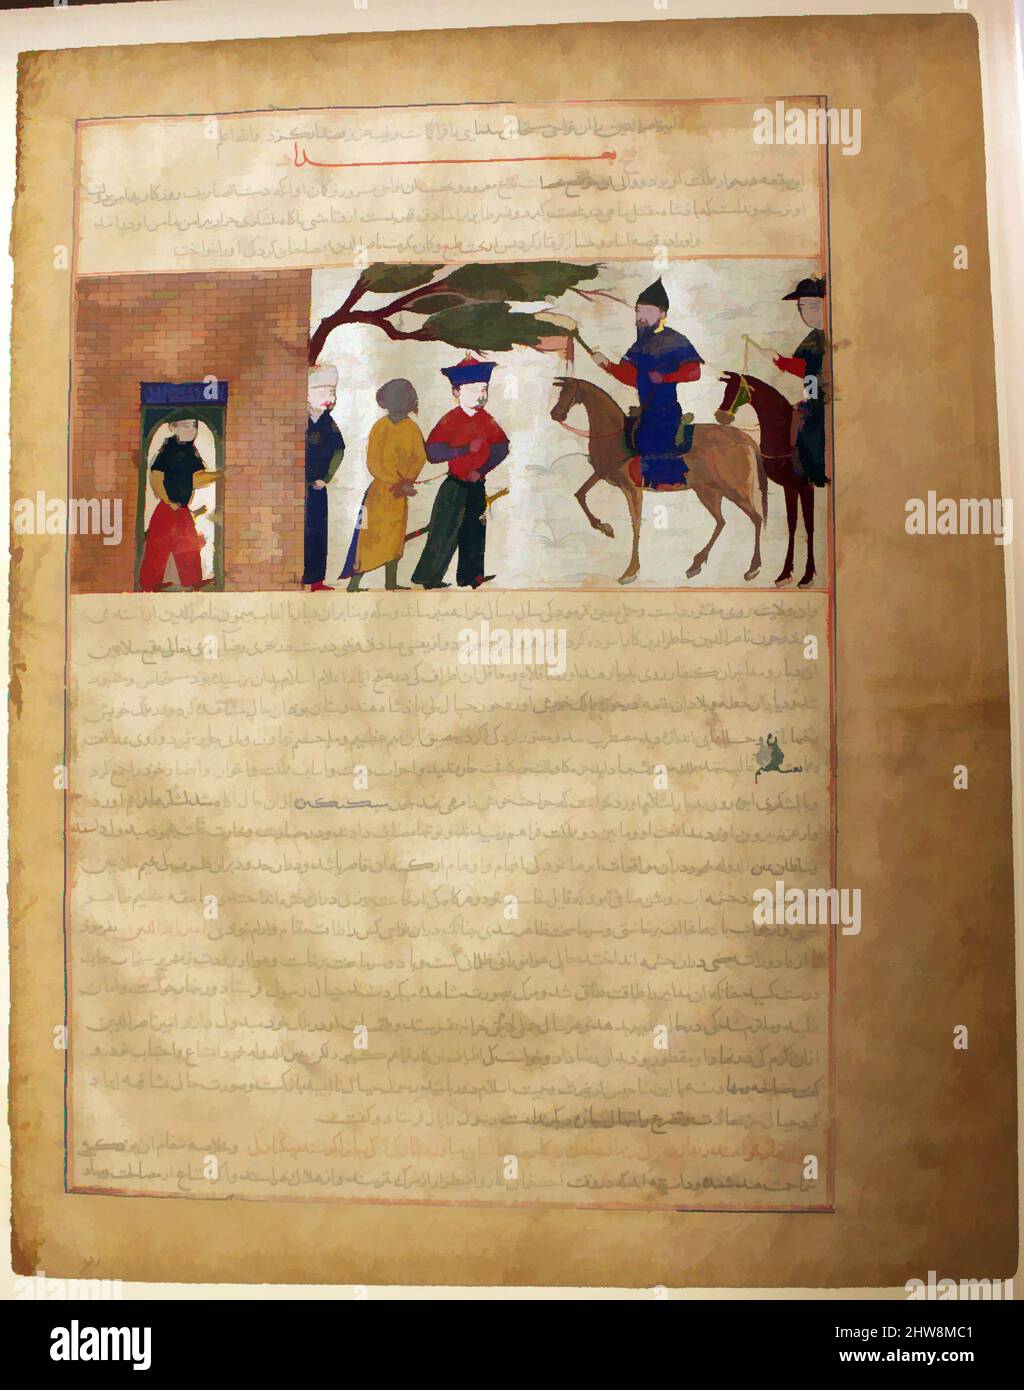 Art inspired by Captured Indian Raja Brought to Sultan Mahmud of Ghazni', Folio from a Majma al-Tavarikh (World Histories), ca. 1425, Made in present-day Afghanistan, Herat, Ink, opaque watercolor, silver, and gold on brownish paper, Image 10 1/4 in x 14 11/16 in., Codices, Classic works modernized by Artotop with a splash of modernity. Shapes, color and value, eye-catching visual impact on art. Emotions through freedom of artworks in a contemporary way. A timeless message pursuing a wildly creative new direction. Artists turning to the digital medium and creating the Artotop NFT Stock Photo